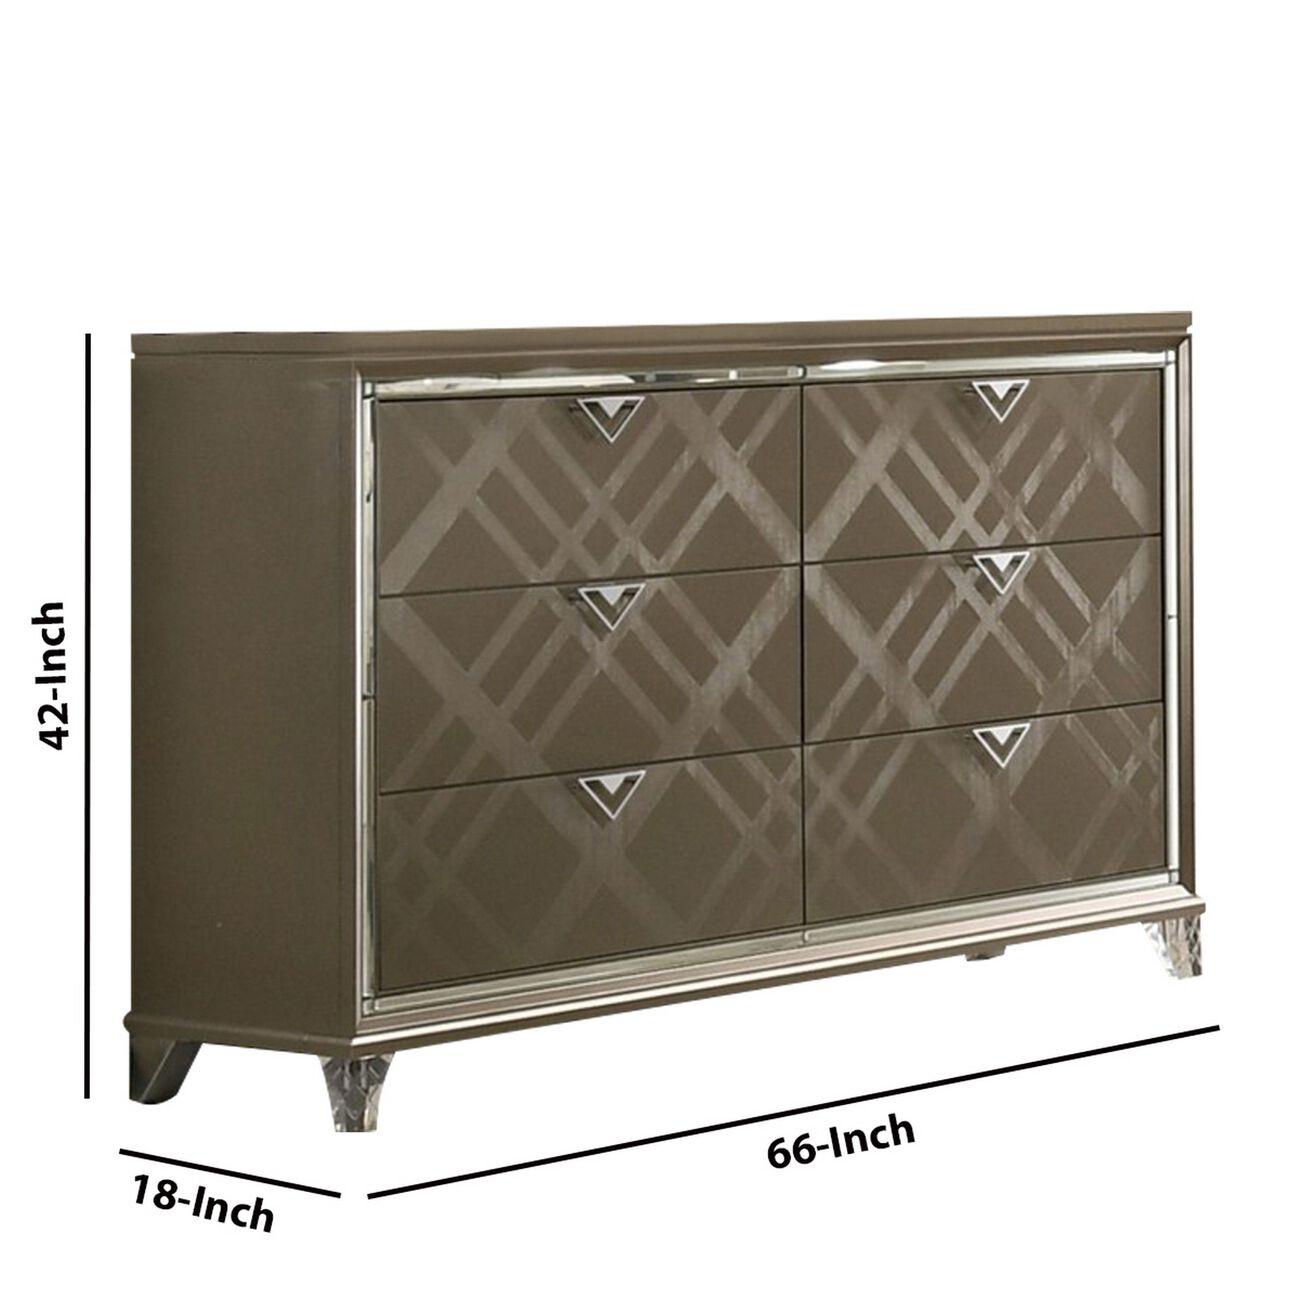 6 Drawer Wooden Dresser with Mirror Accent and Acrylic Legs, Taupe Brown